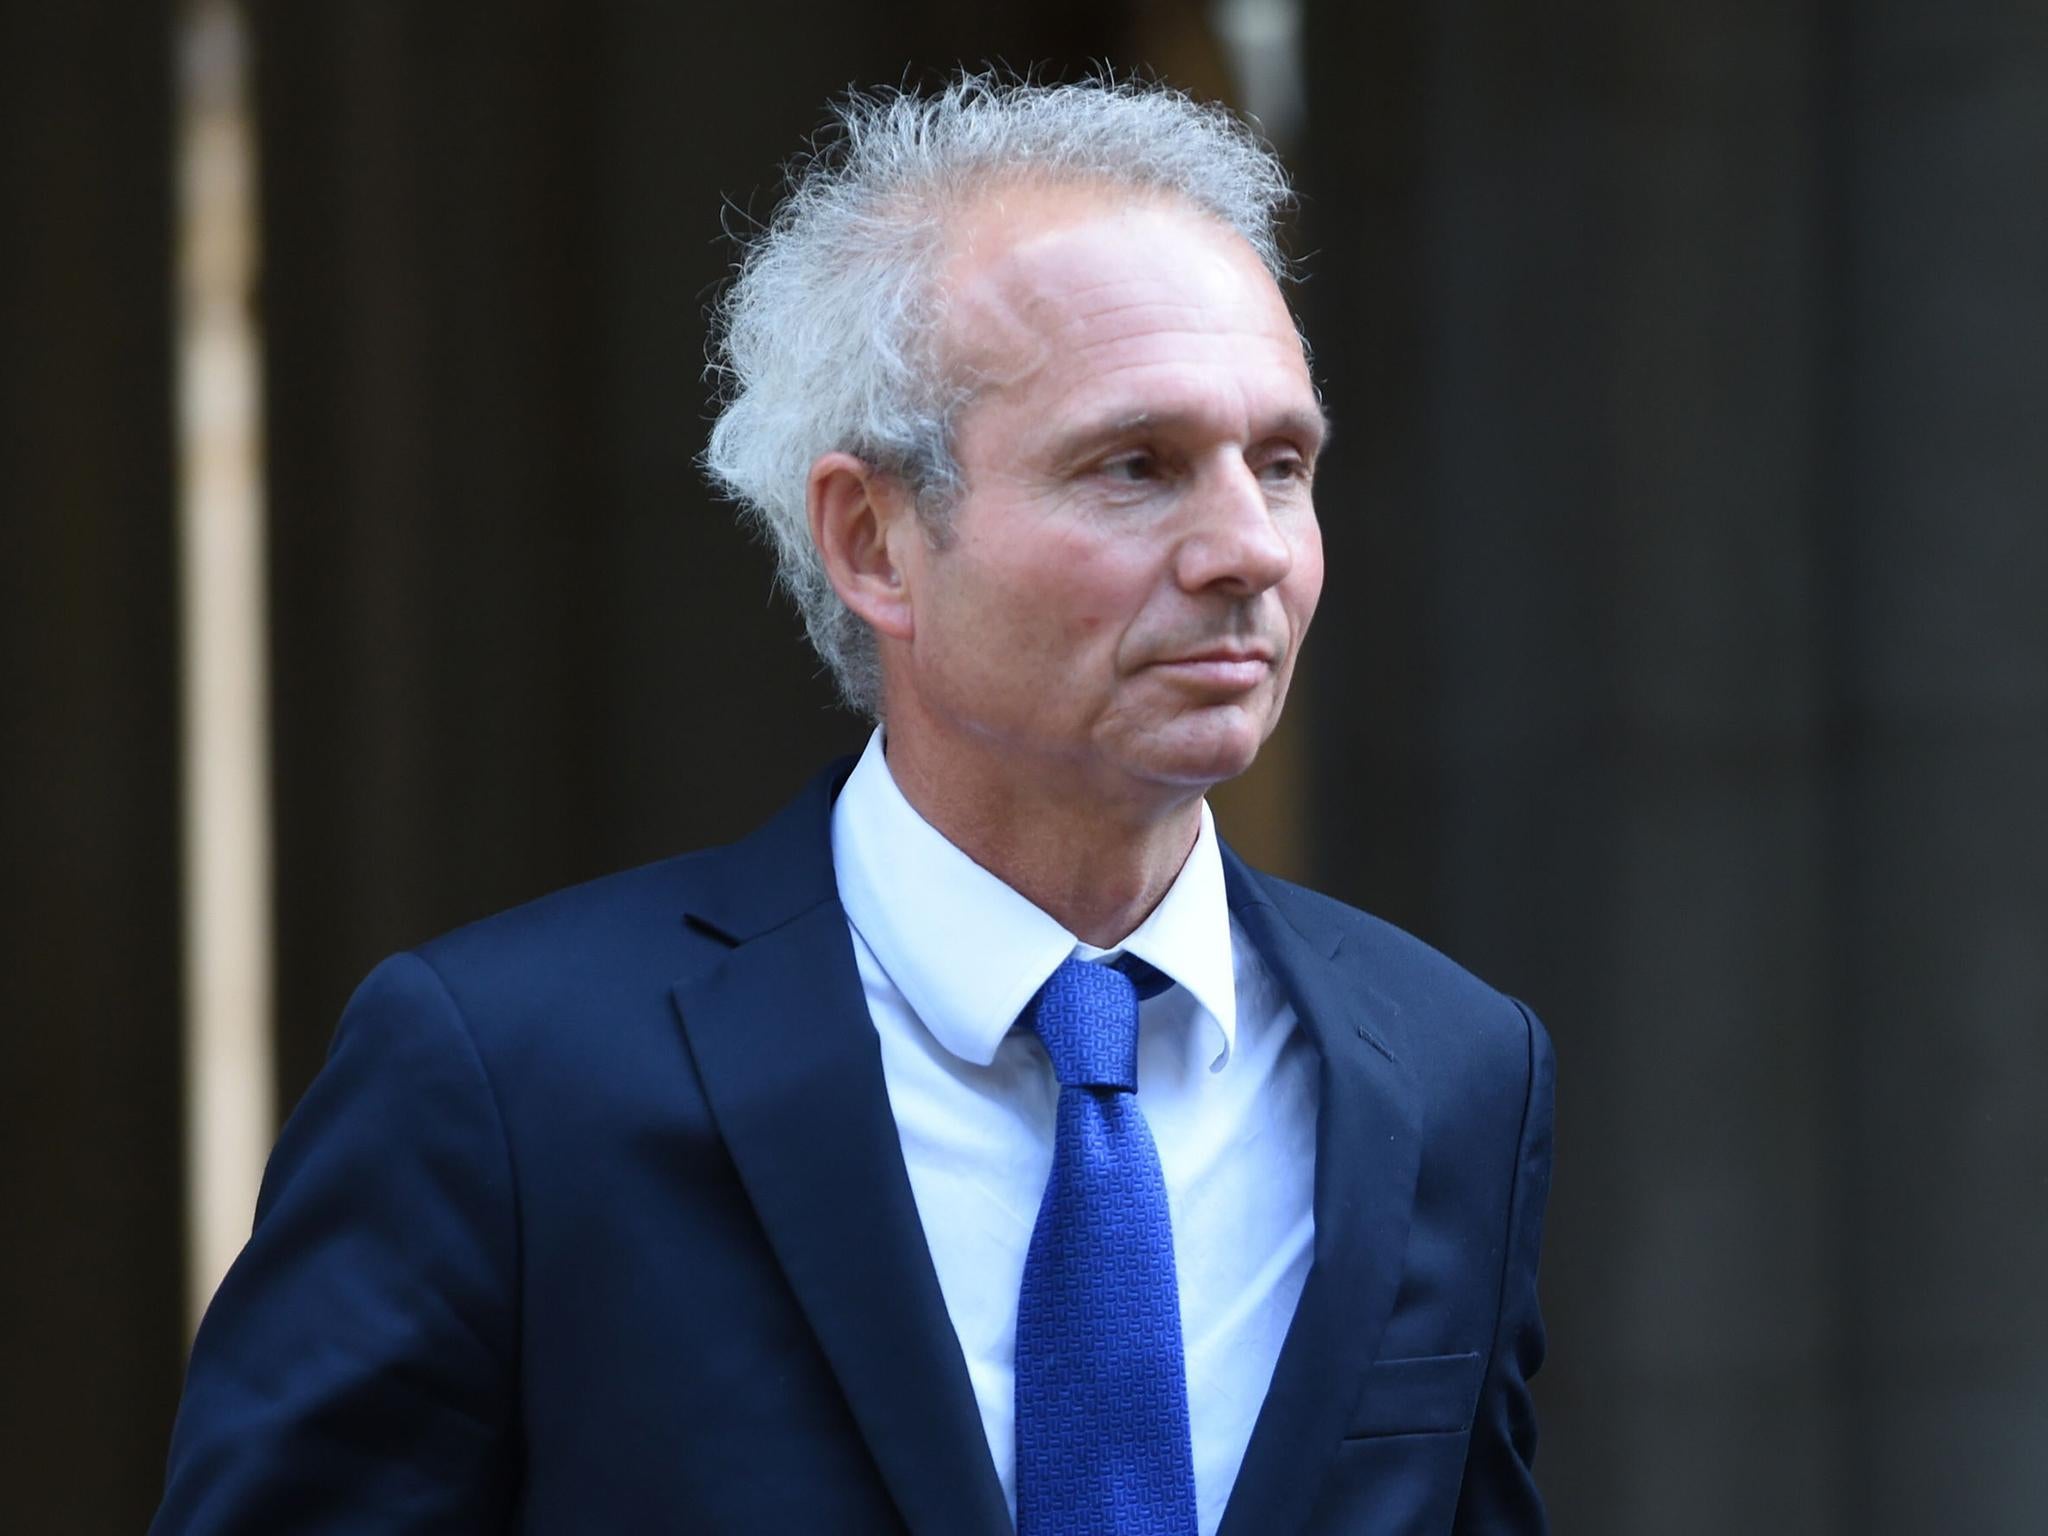 David Lidington will serve as the new Justice Secretary following the Cabinet reshuffle